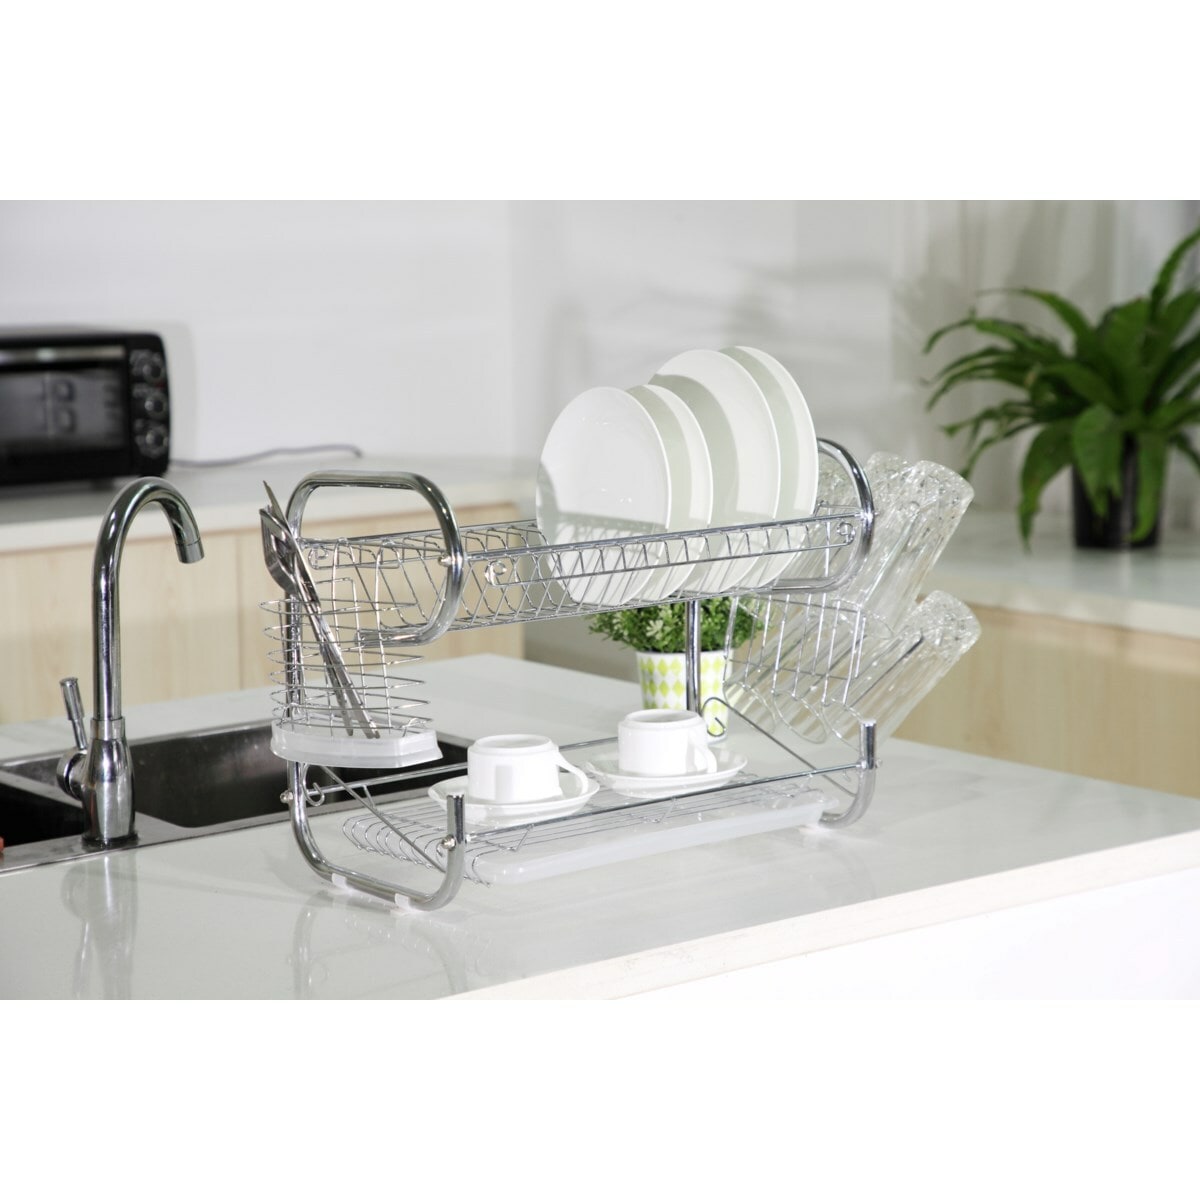 Hastings Home 1-Tier 22-in Plastic Drying Rack at